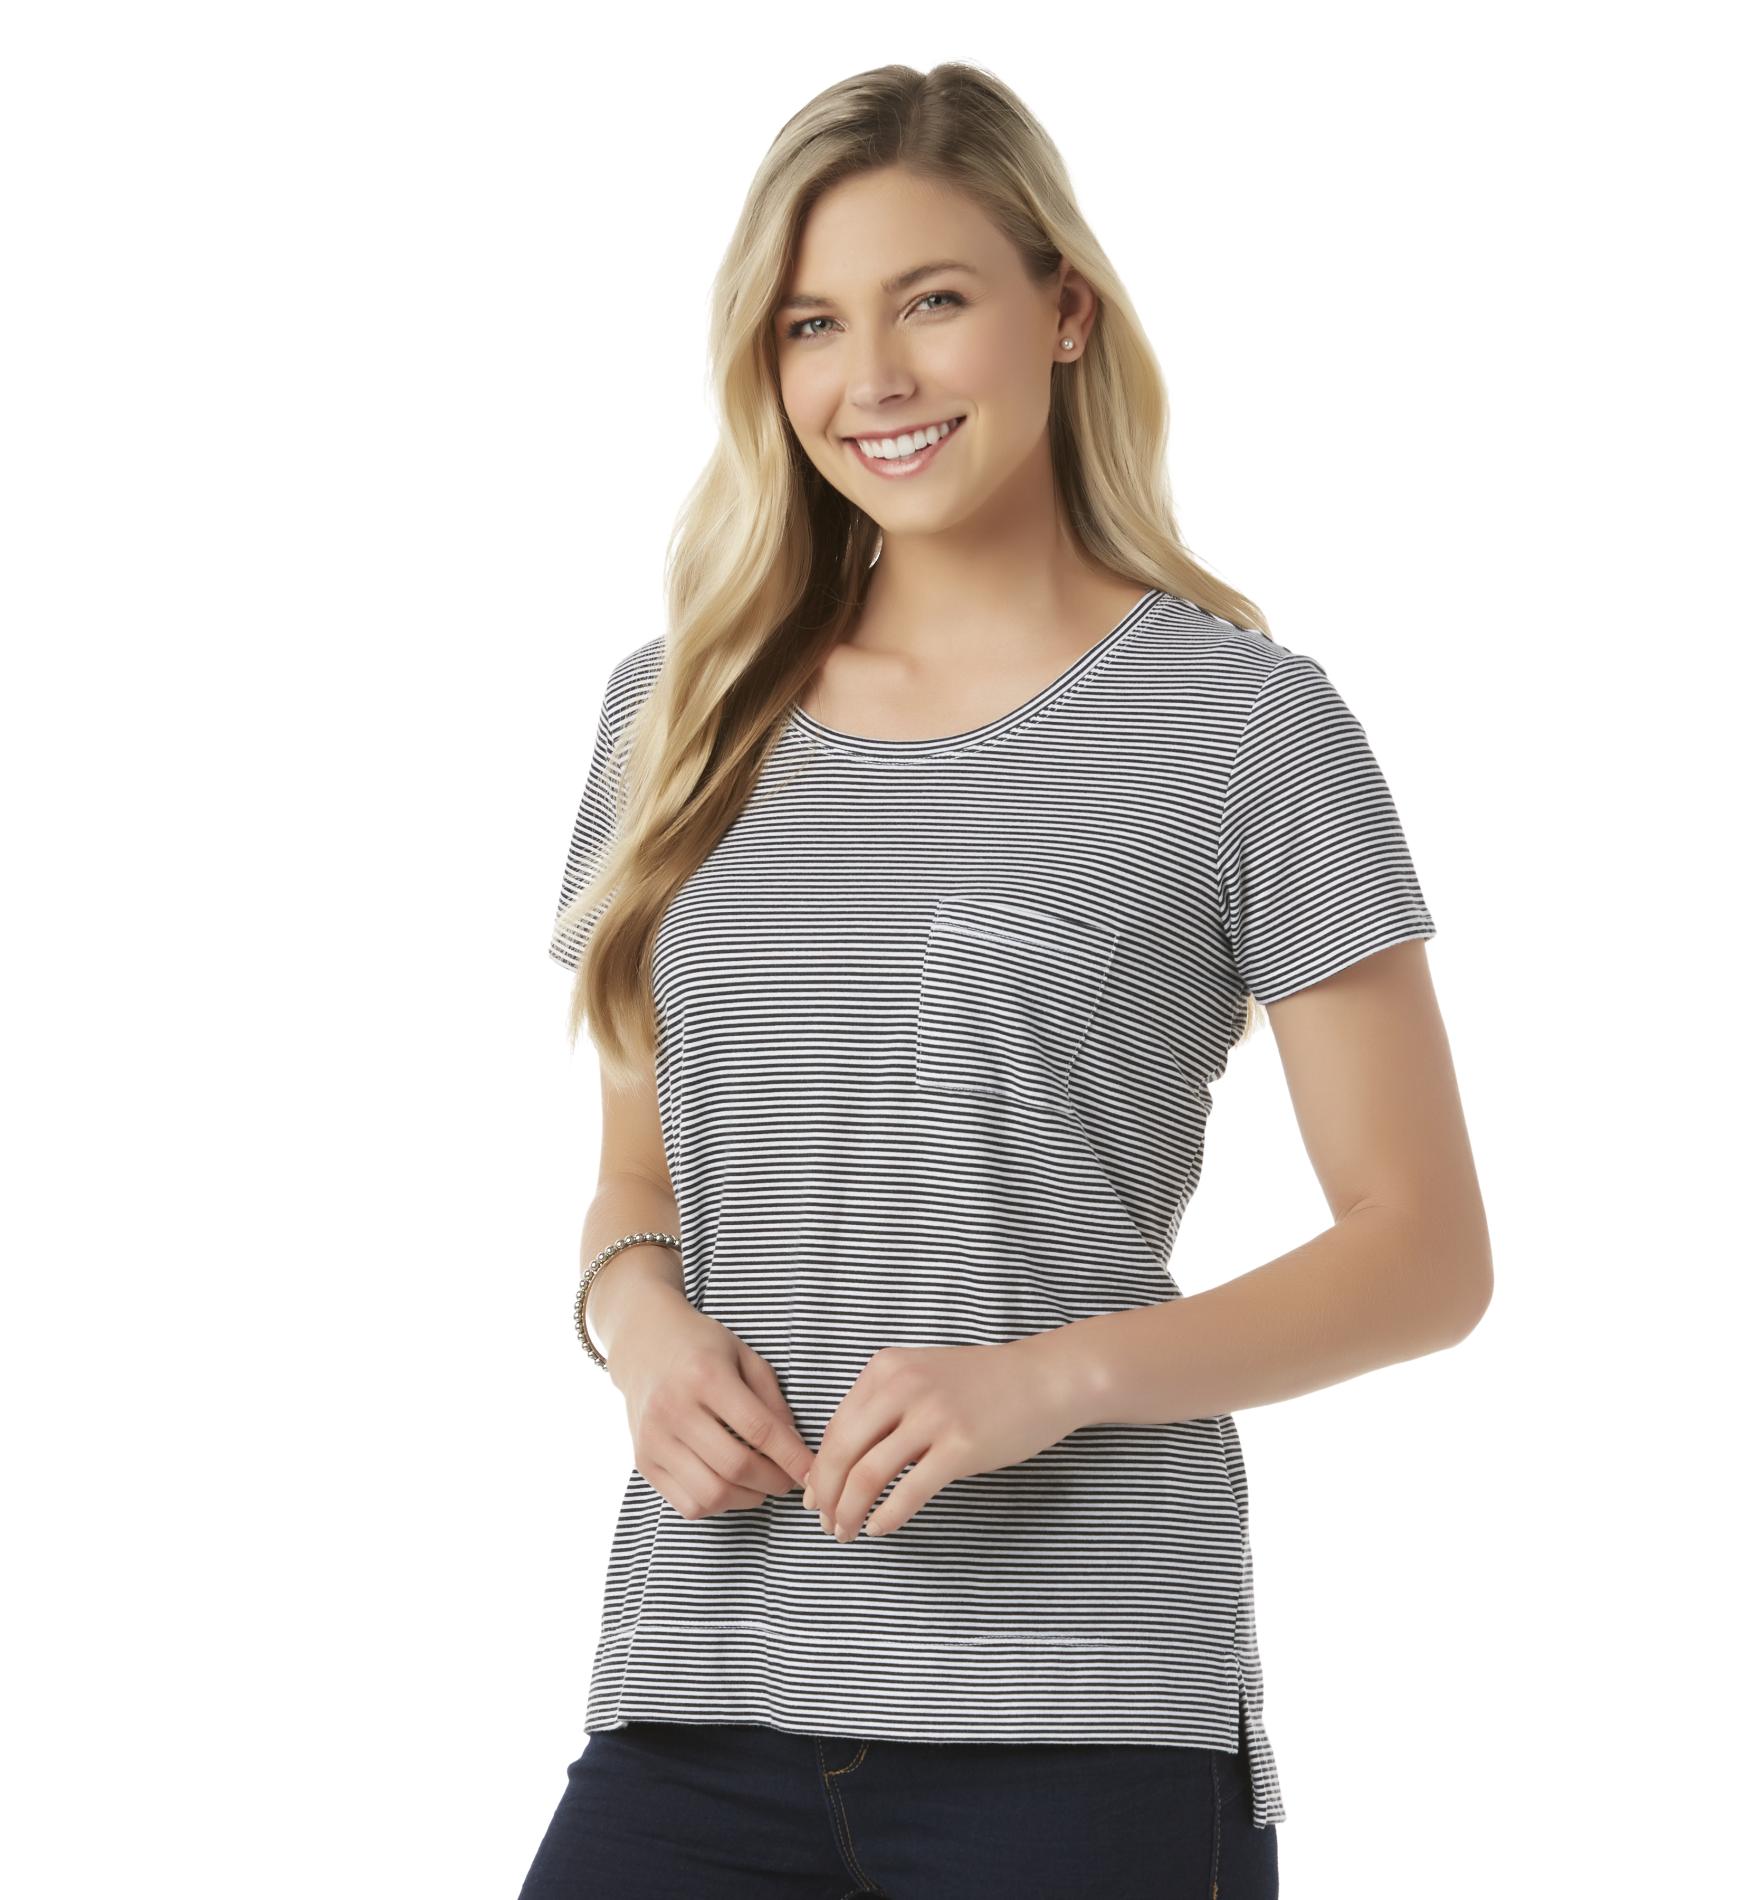 Simply Styled Women's Pocket T-Shirt - Striped